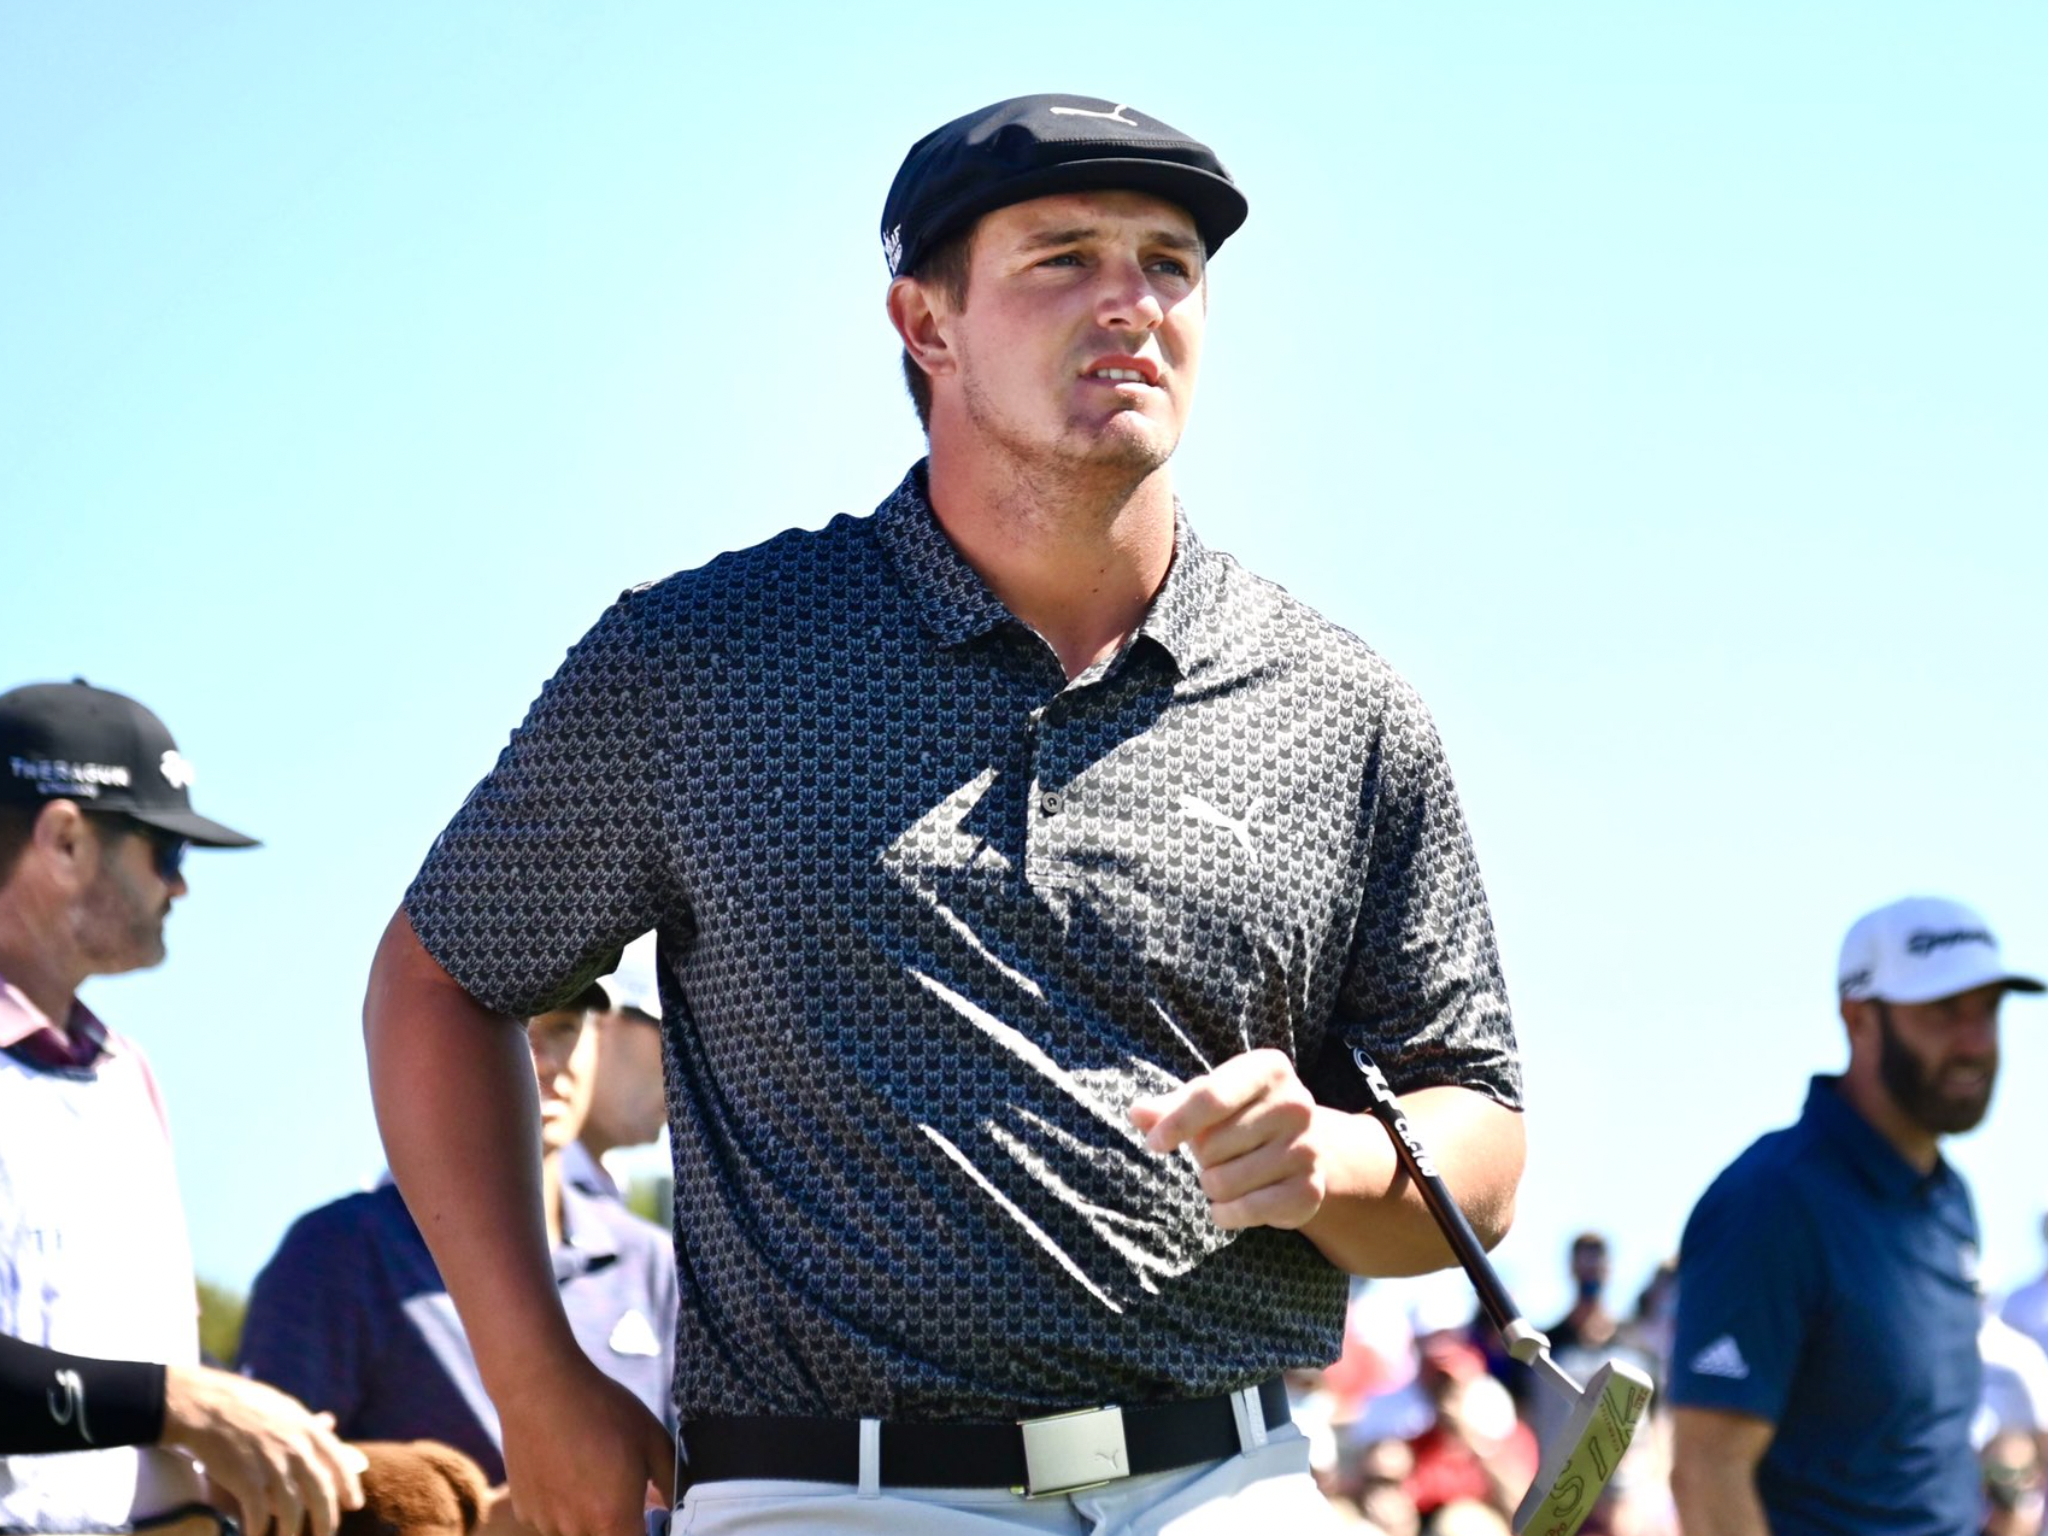 How to watch Bryson DeChambeau in the 2021 Long Drive World Championship